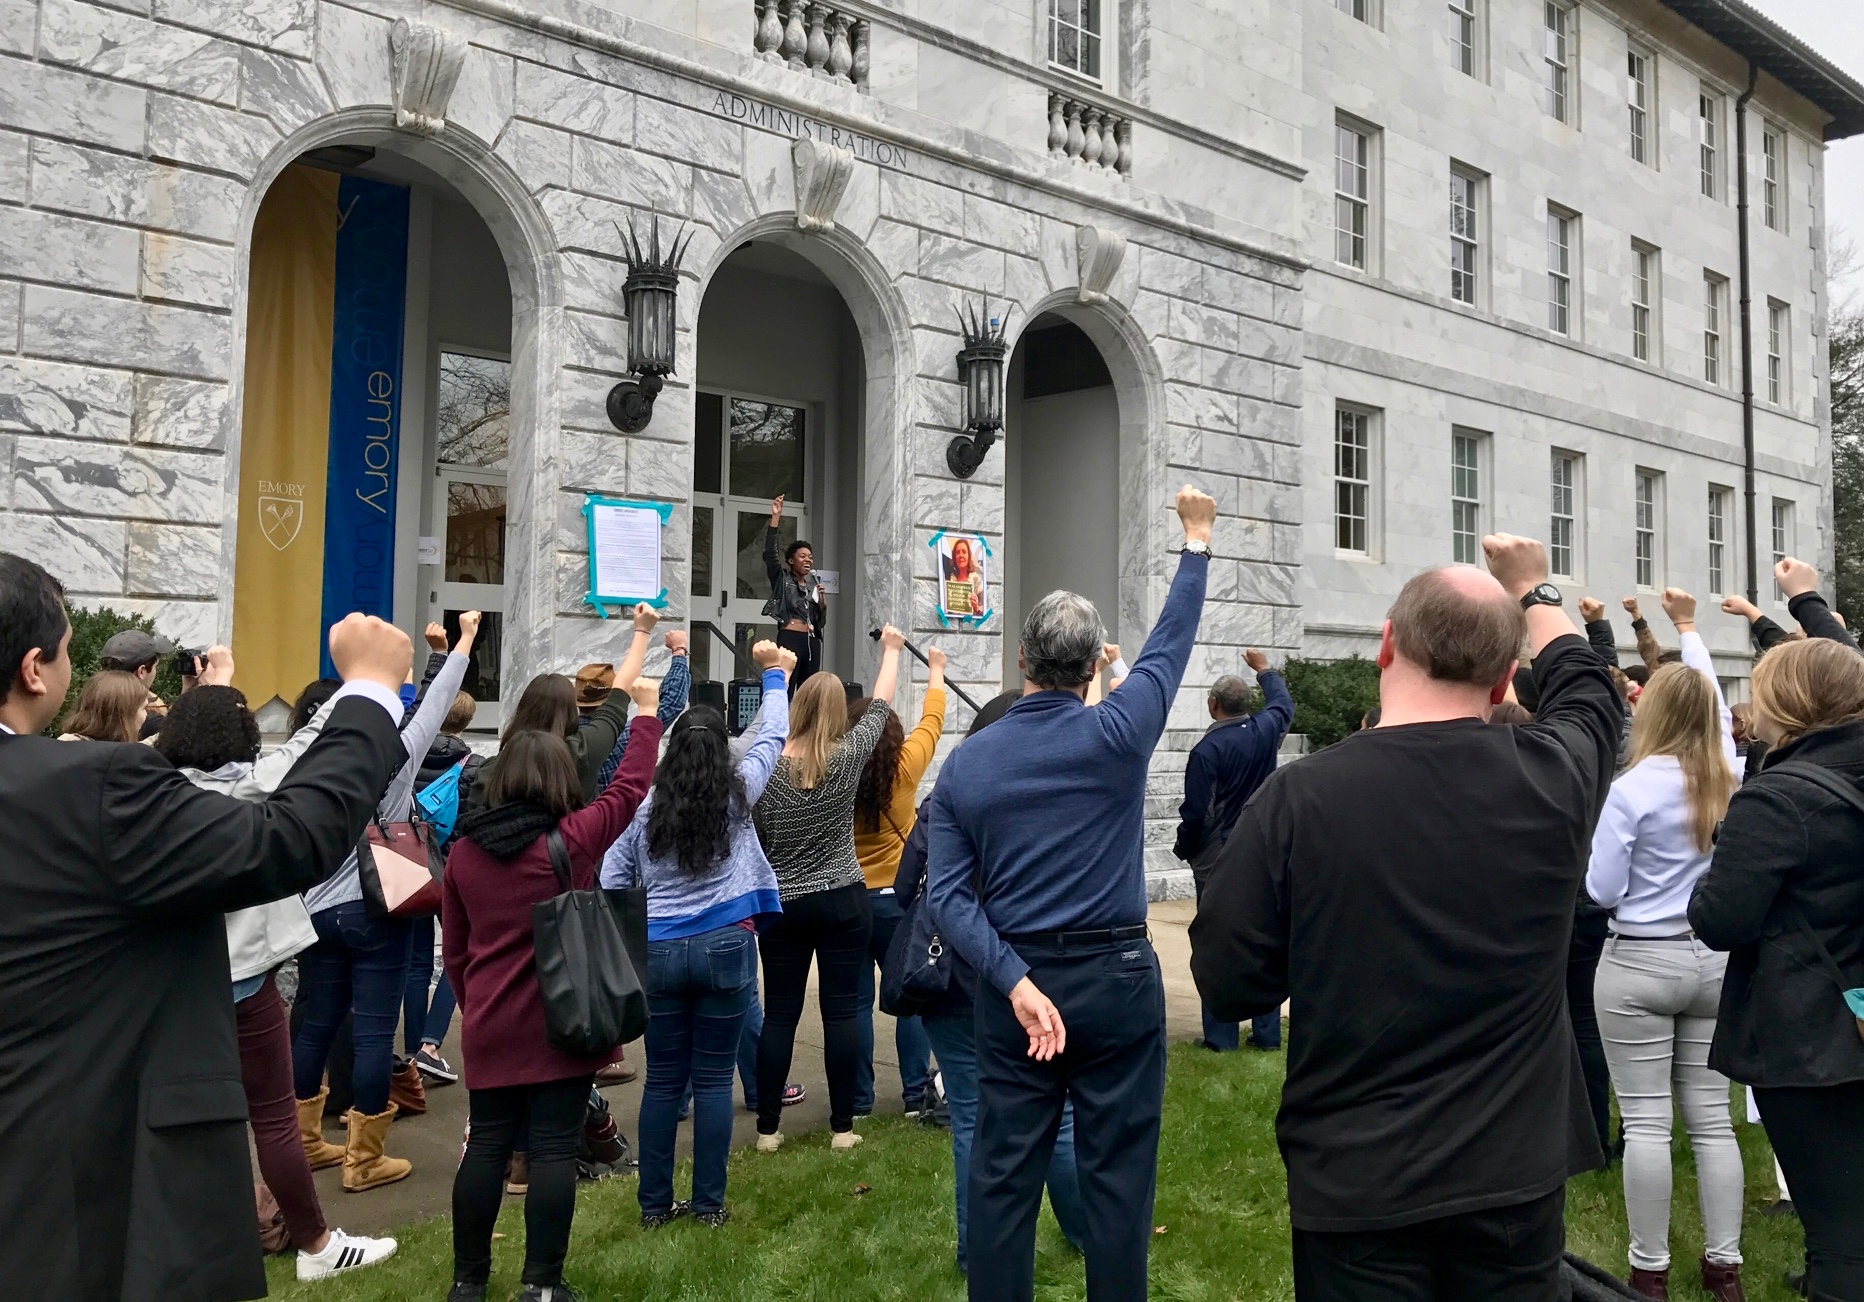 Demonstrators raise their fists in unison, chanting "We must love one another and protect each other. We have nothing to lose but our chains.” / Julia Munslow, Executive Editor 